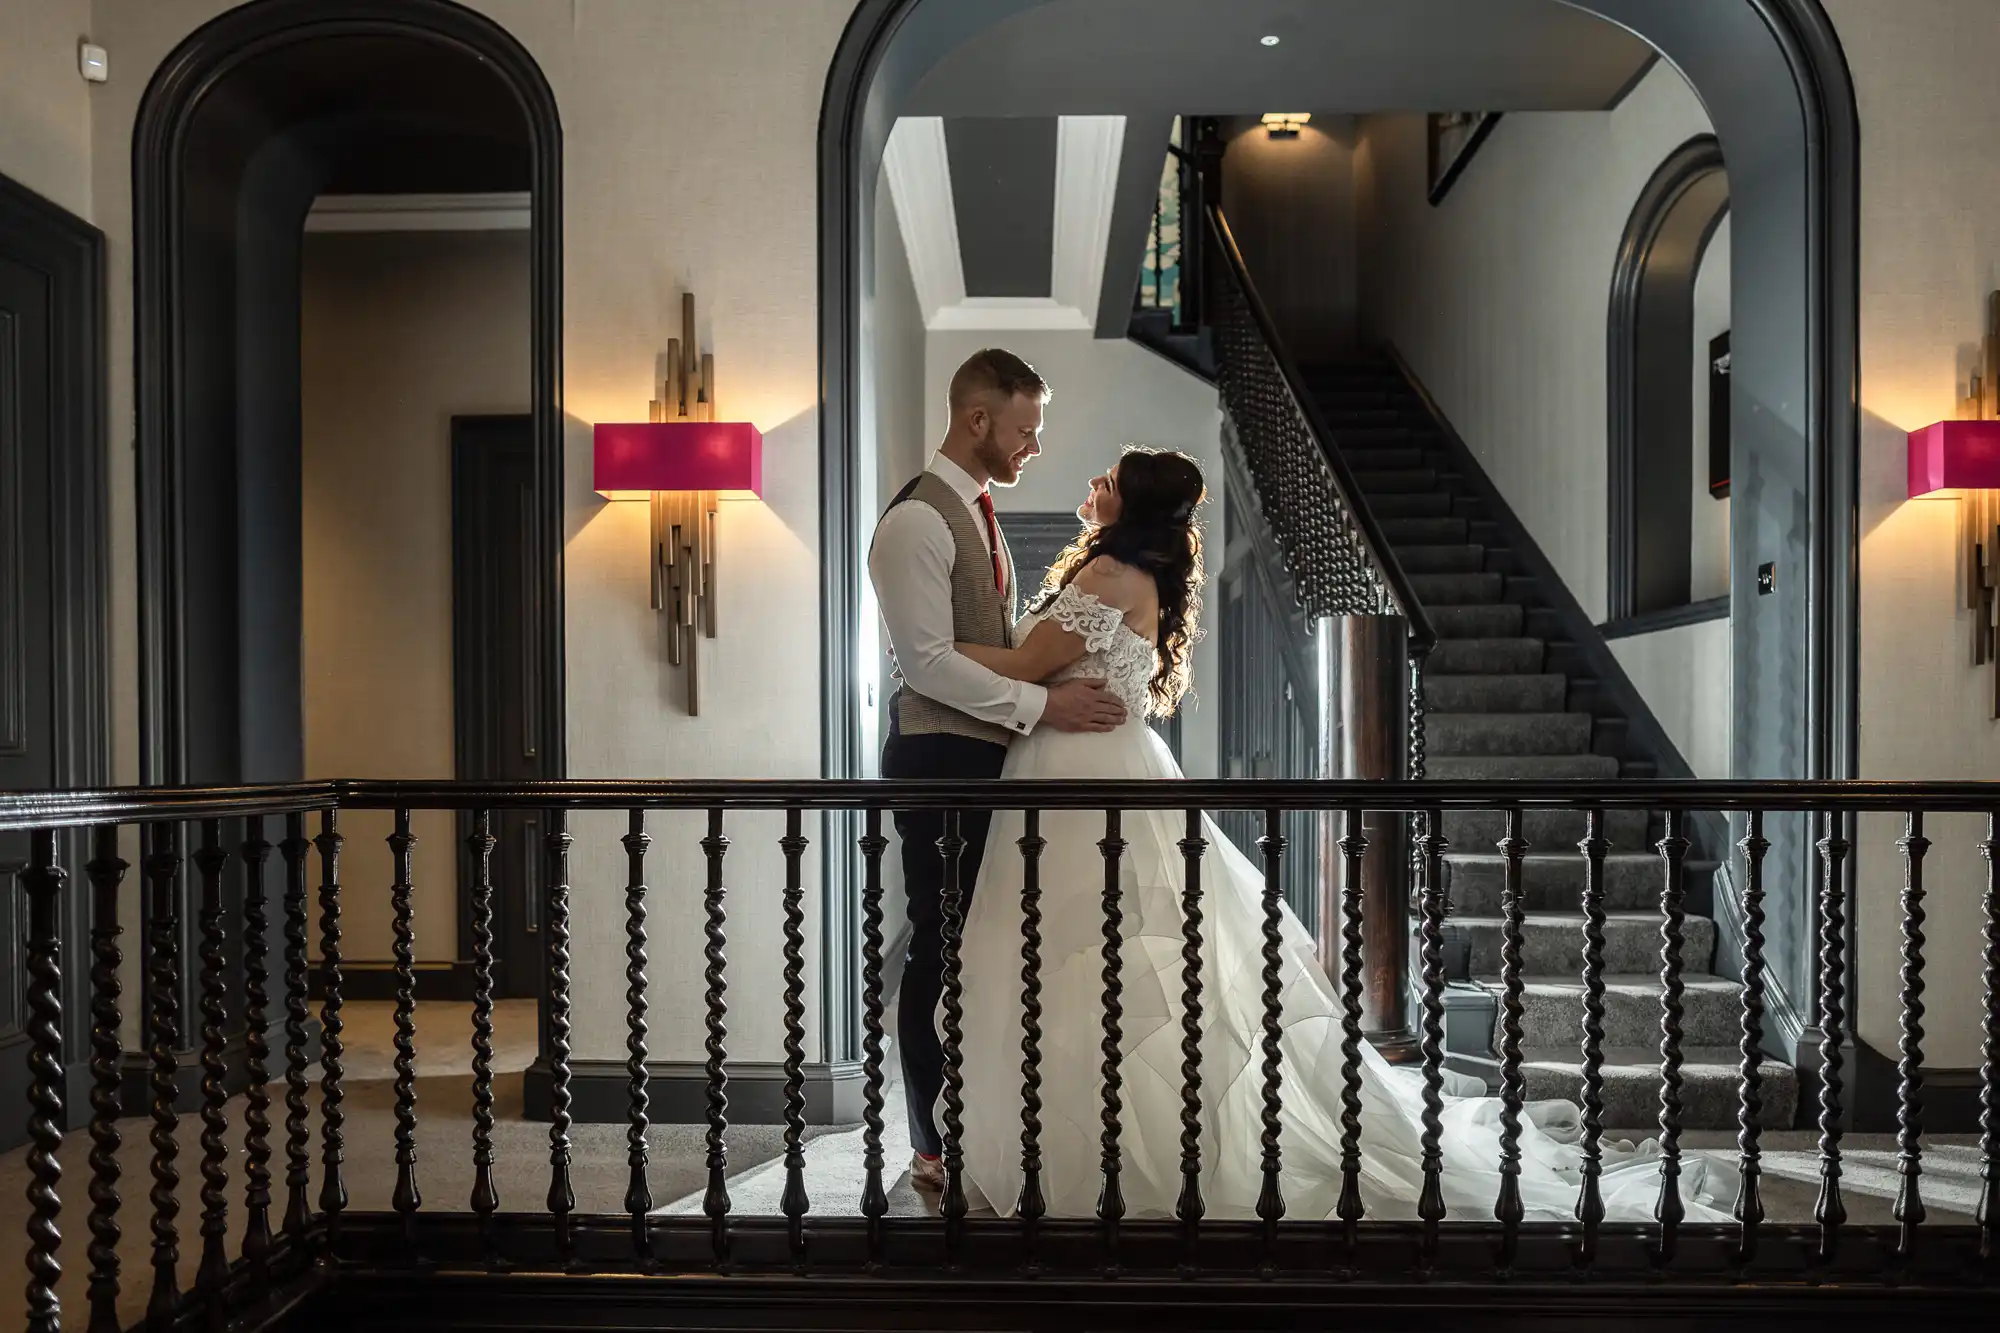 A bride and groom stand on an indoor balcony, holding each other and gazing into each other's eyes. The background features a staircase and an arched hallway with wall sconces.